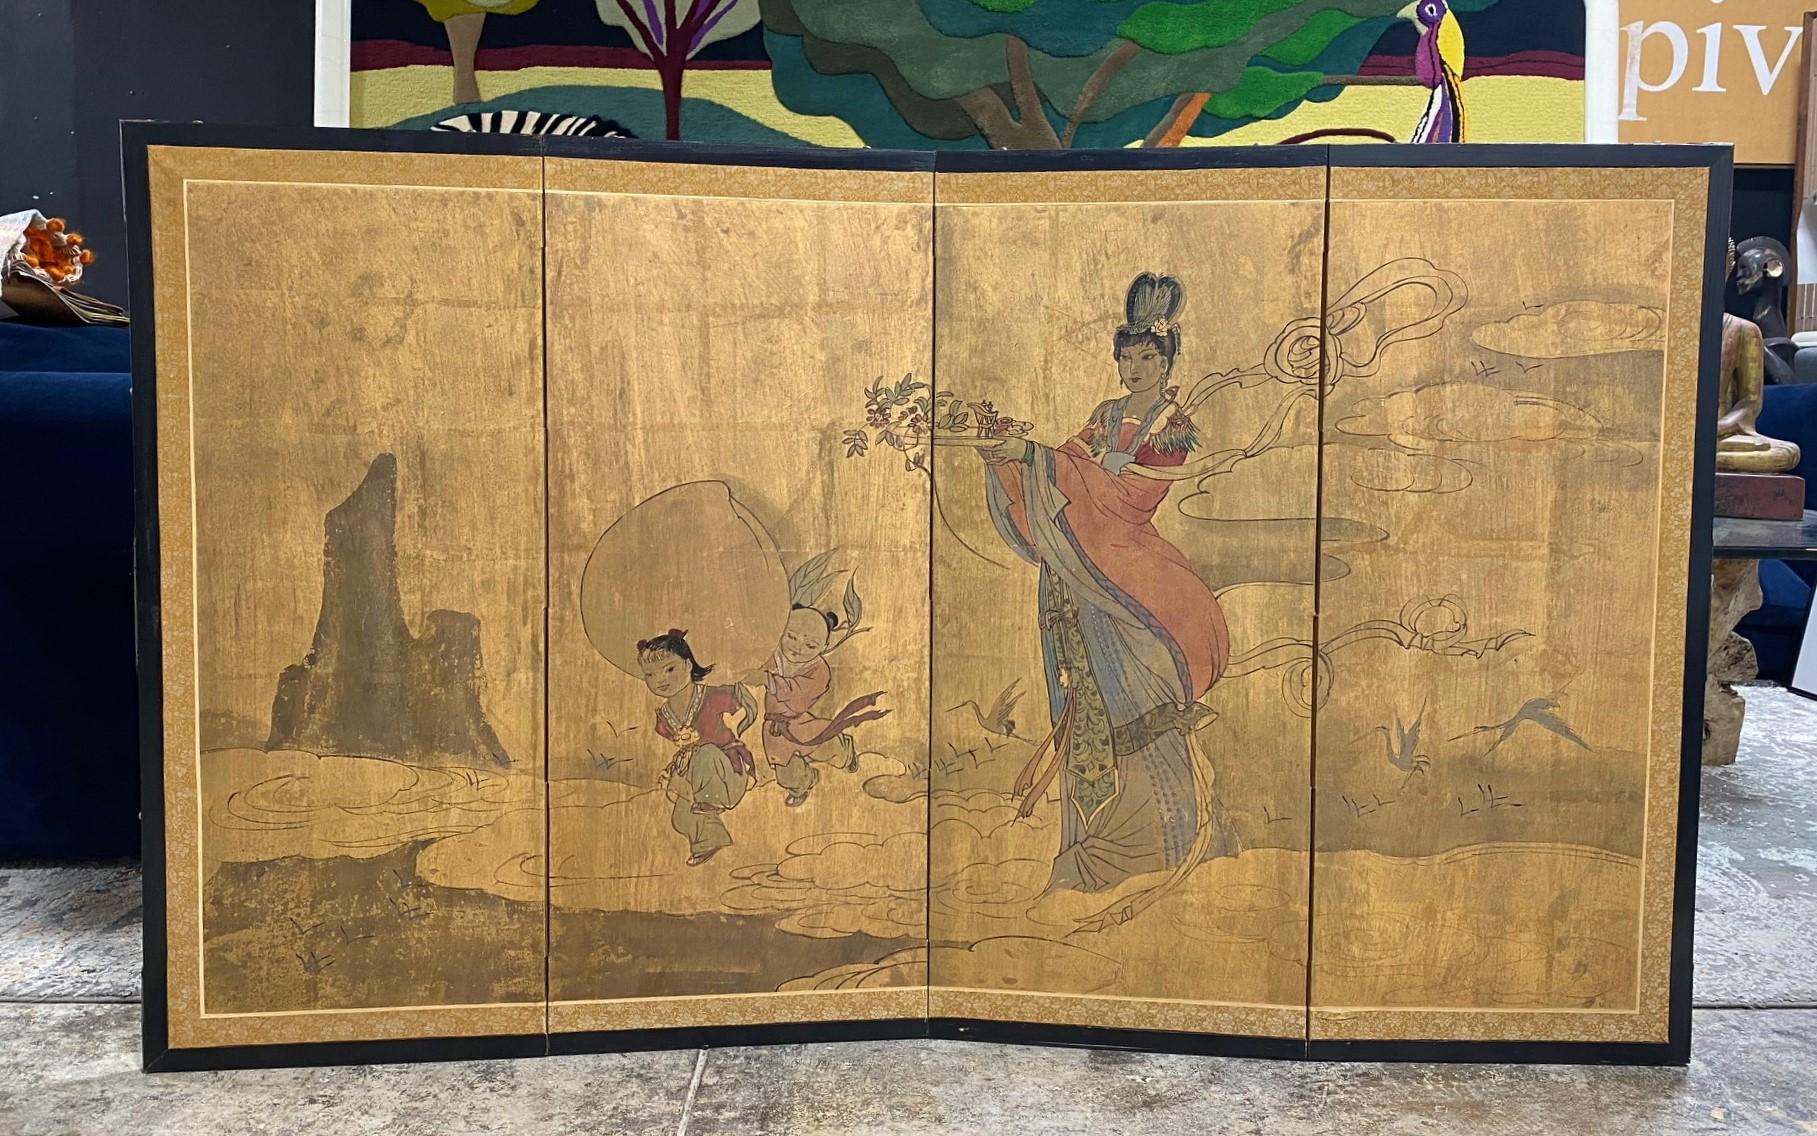 A gorgeous hand-painted four-panel Japanese-style Byobu folding screen depicting a landscape scene with a mother who is apparently on her way to a feast or ceremony carrying a tray of flowers and perhaps tea while her accompanying children seem to